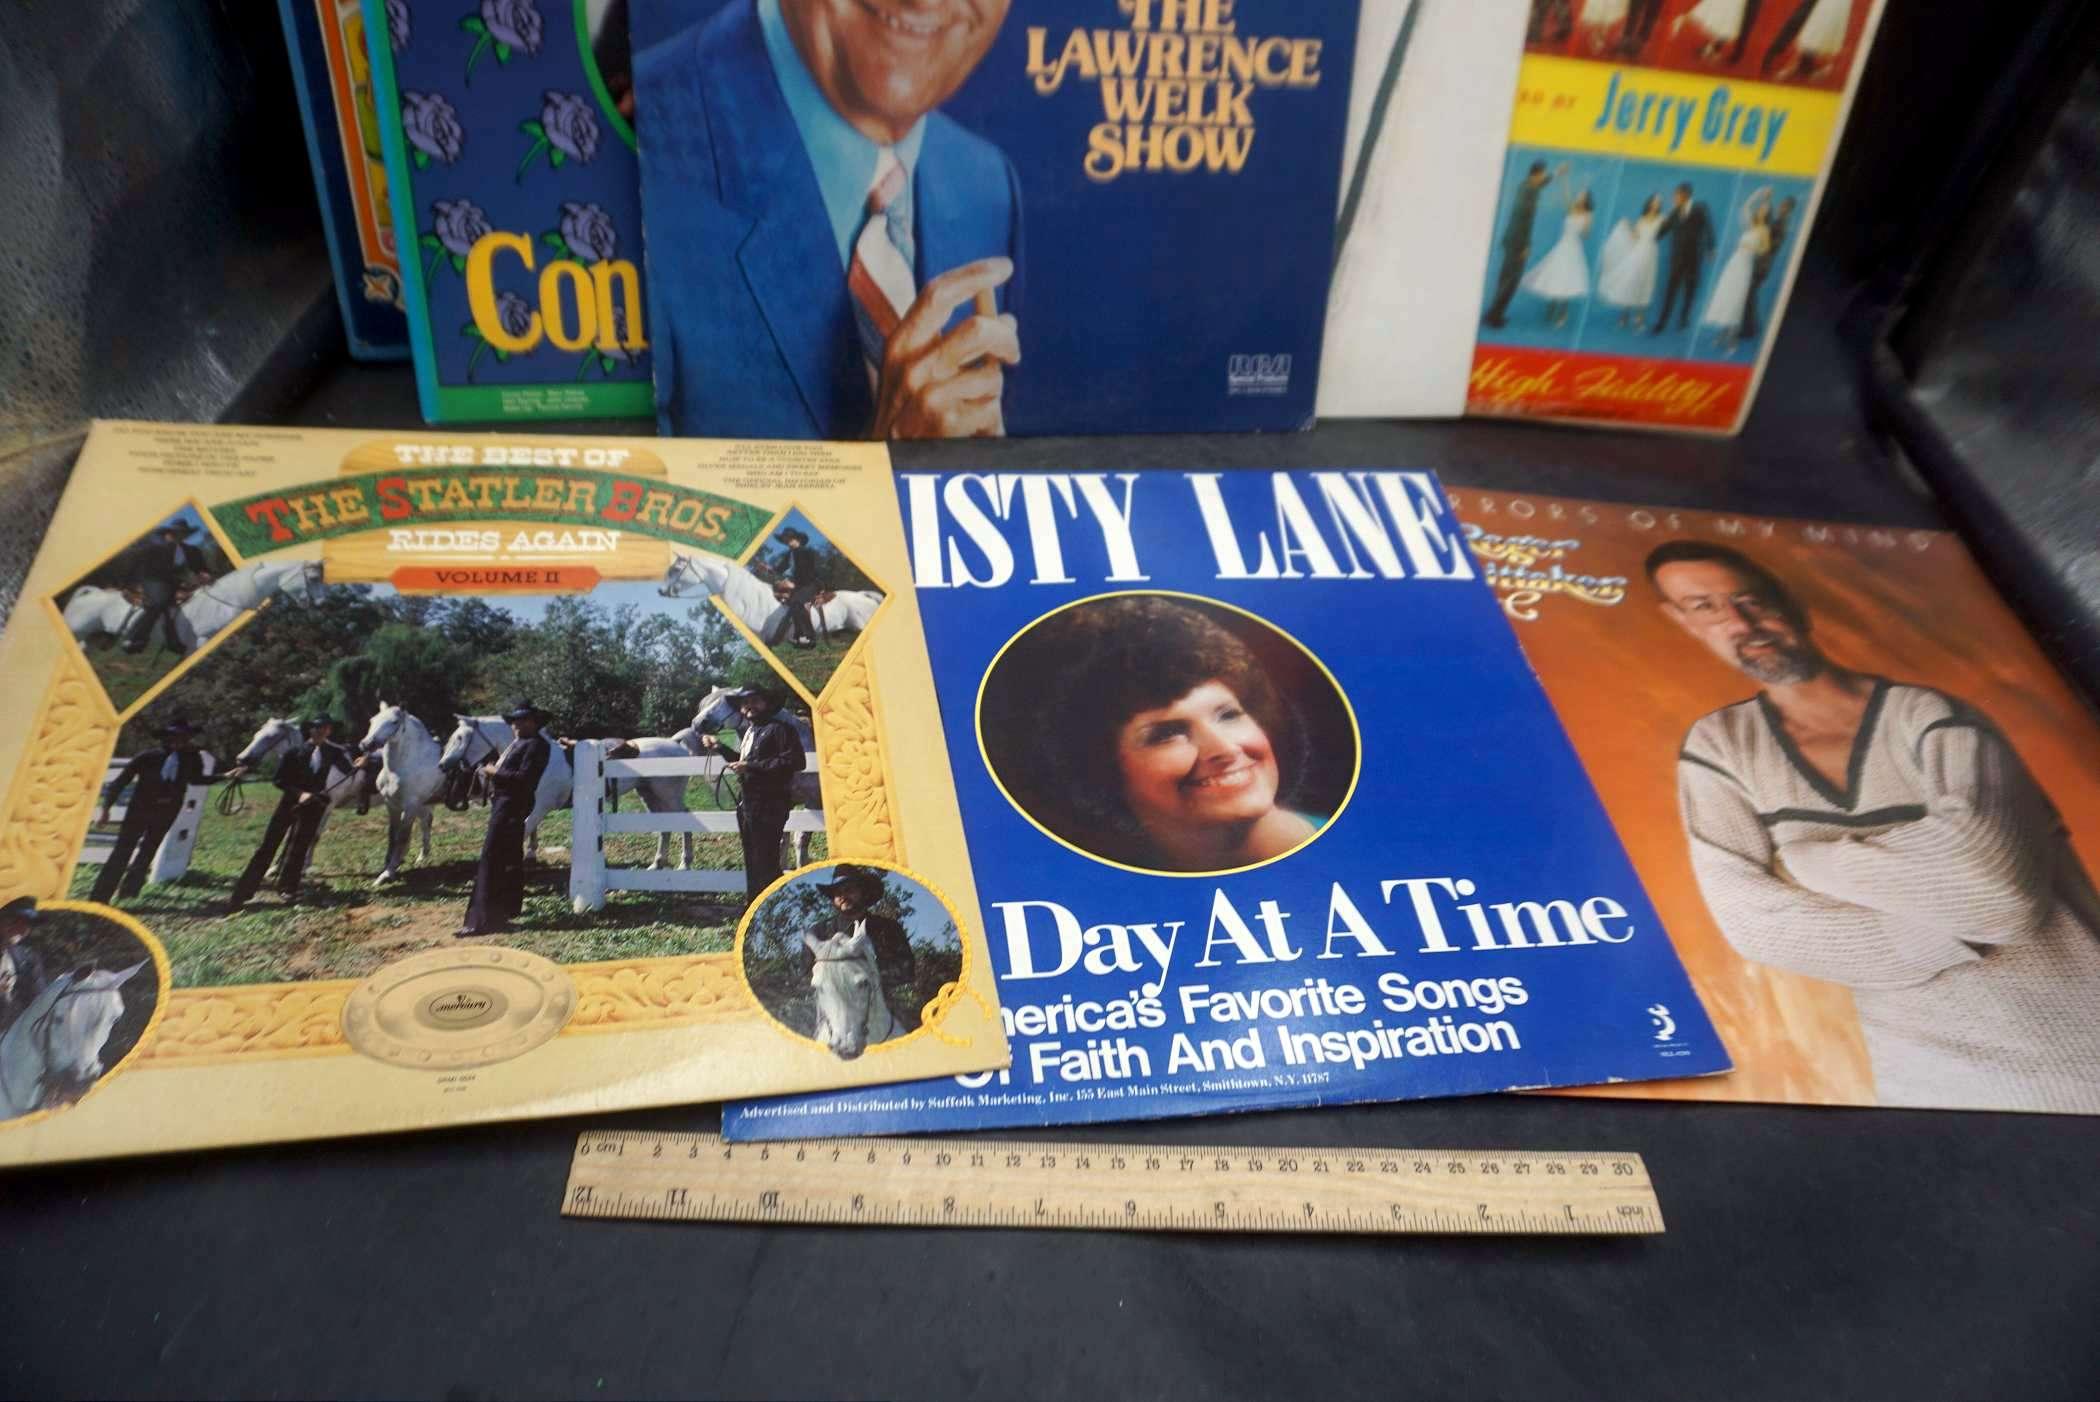 Records - Cristy Lane, Kenny Rogers & More